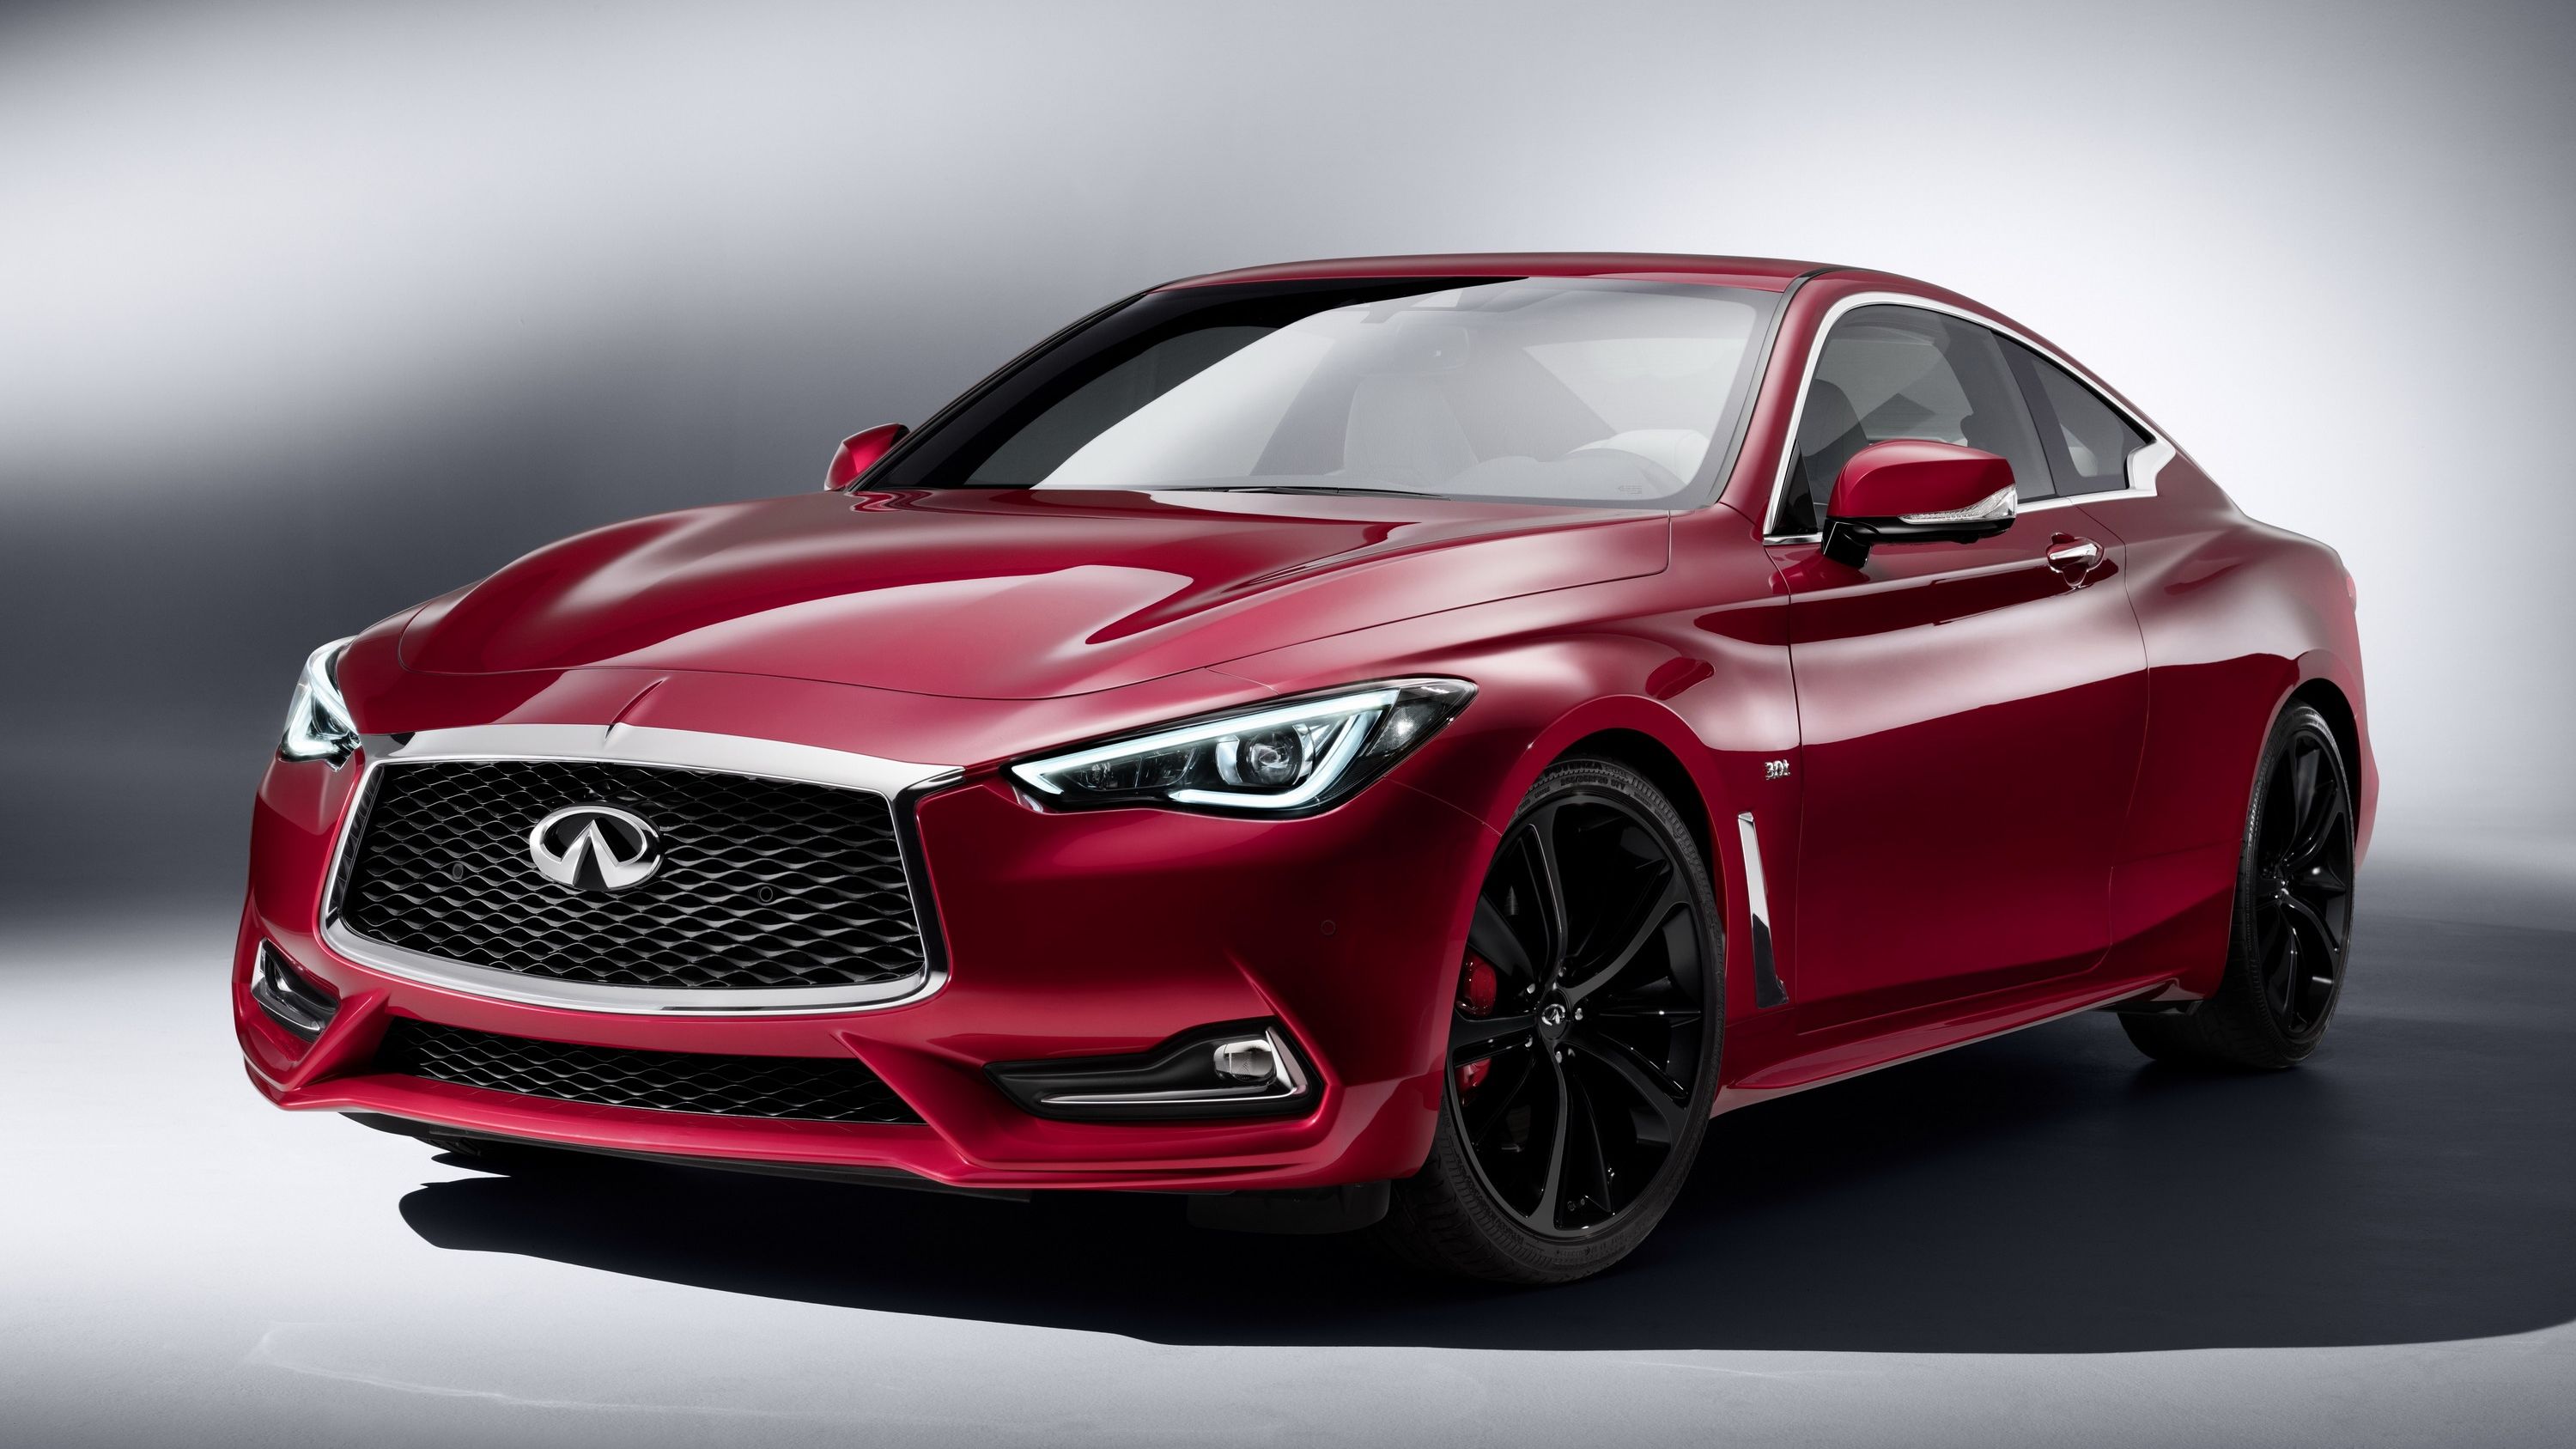 2017 Infiniti Says No to Hardcore Q60, at Least for Now